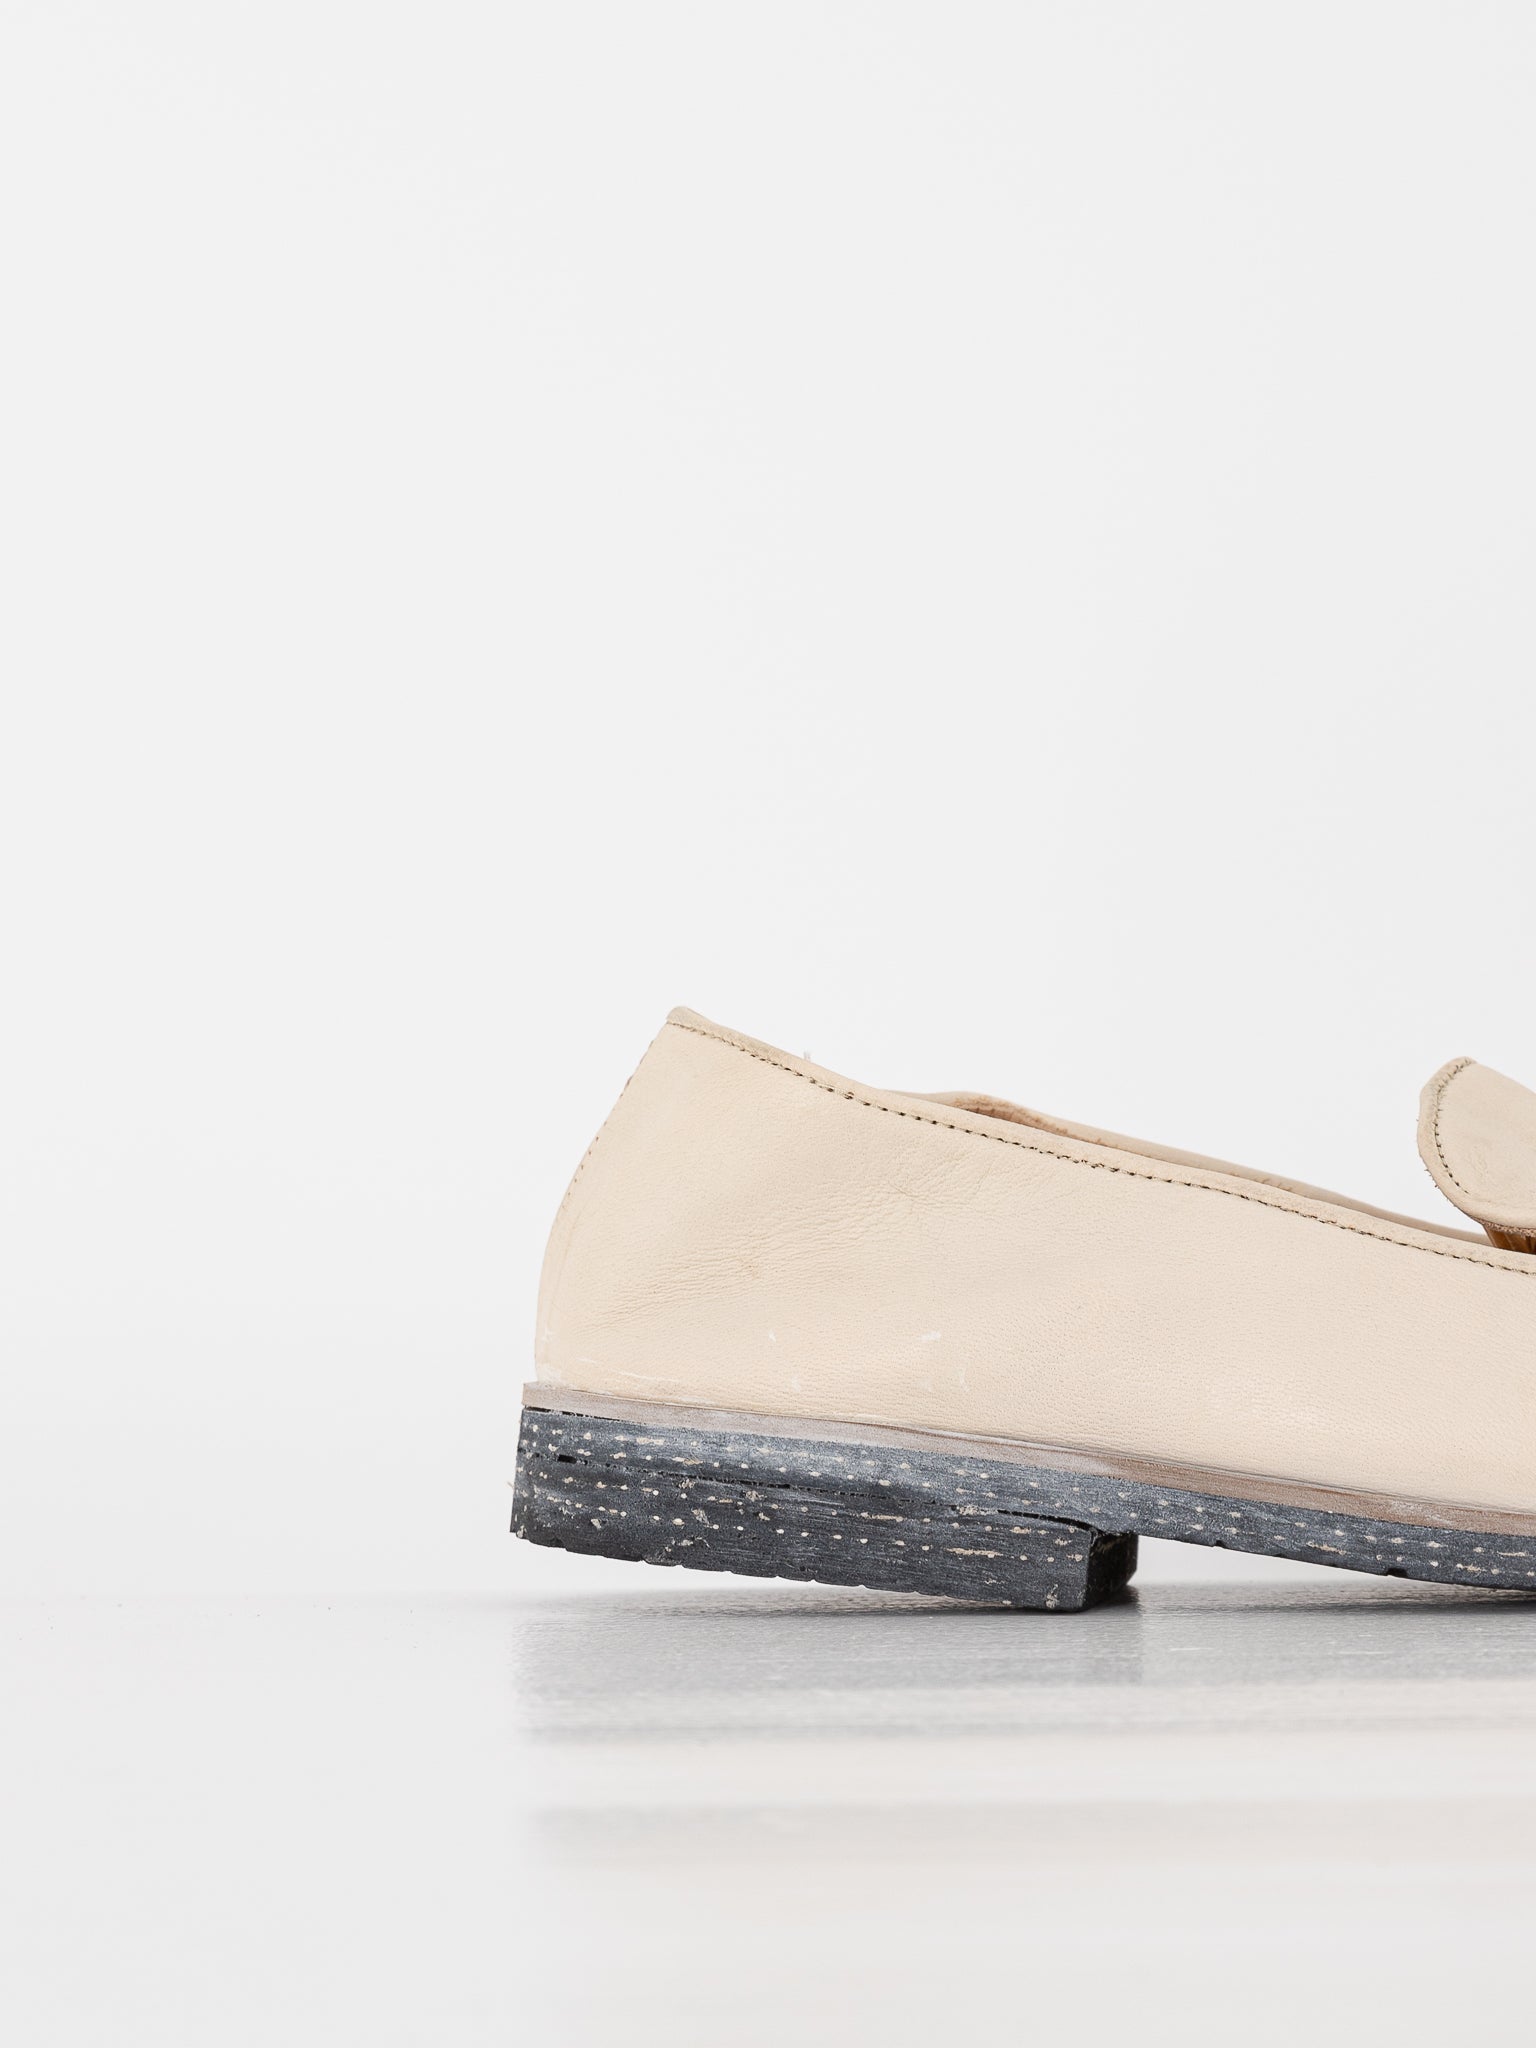 Atelier Inscrire Plano Slip On, Natural - Worthwhile, Inc.